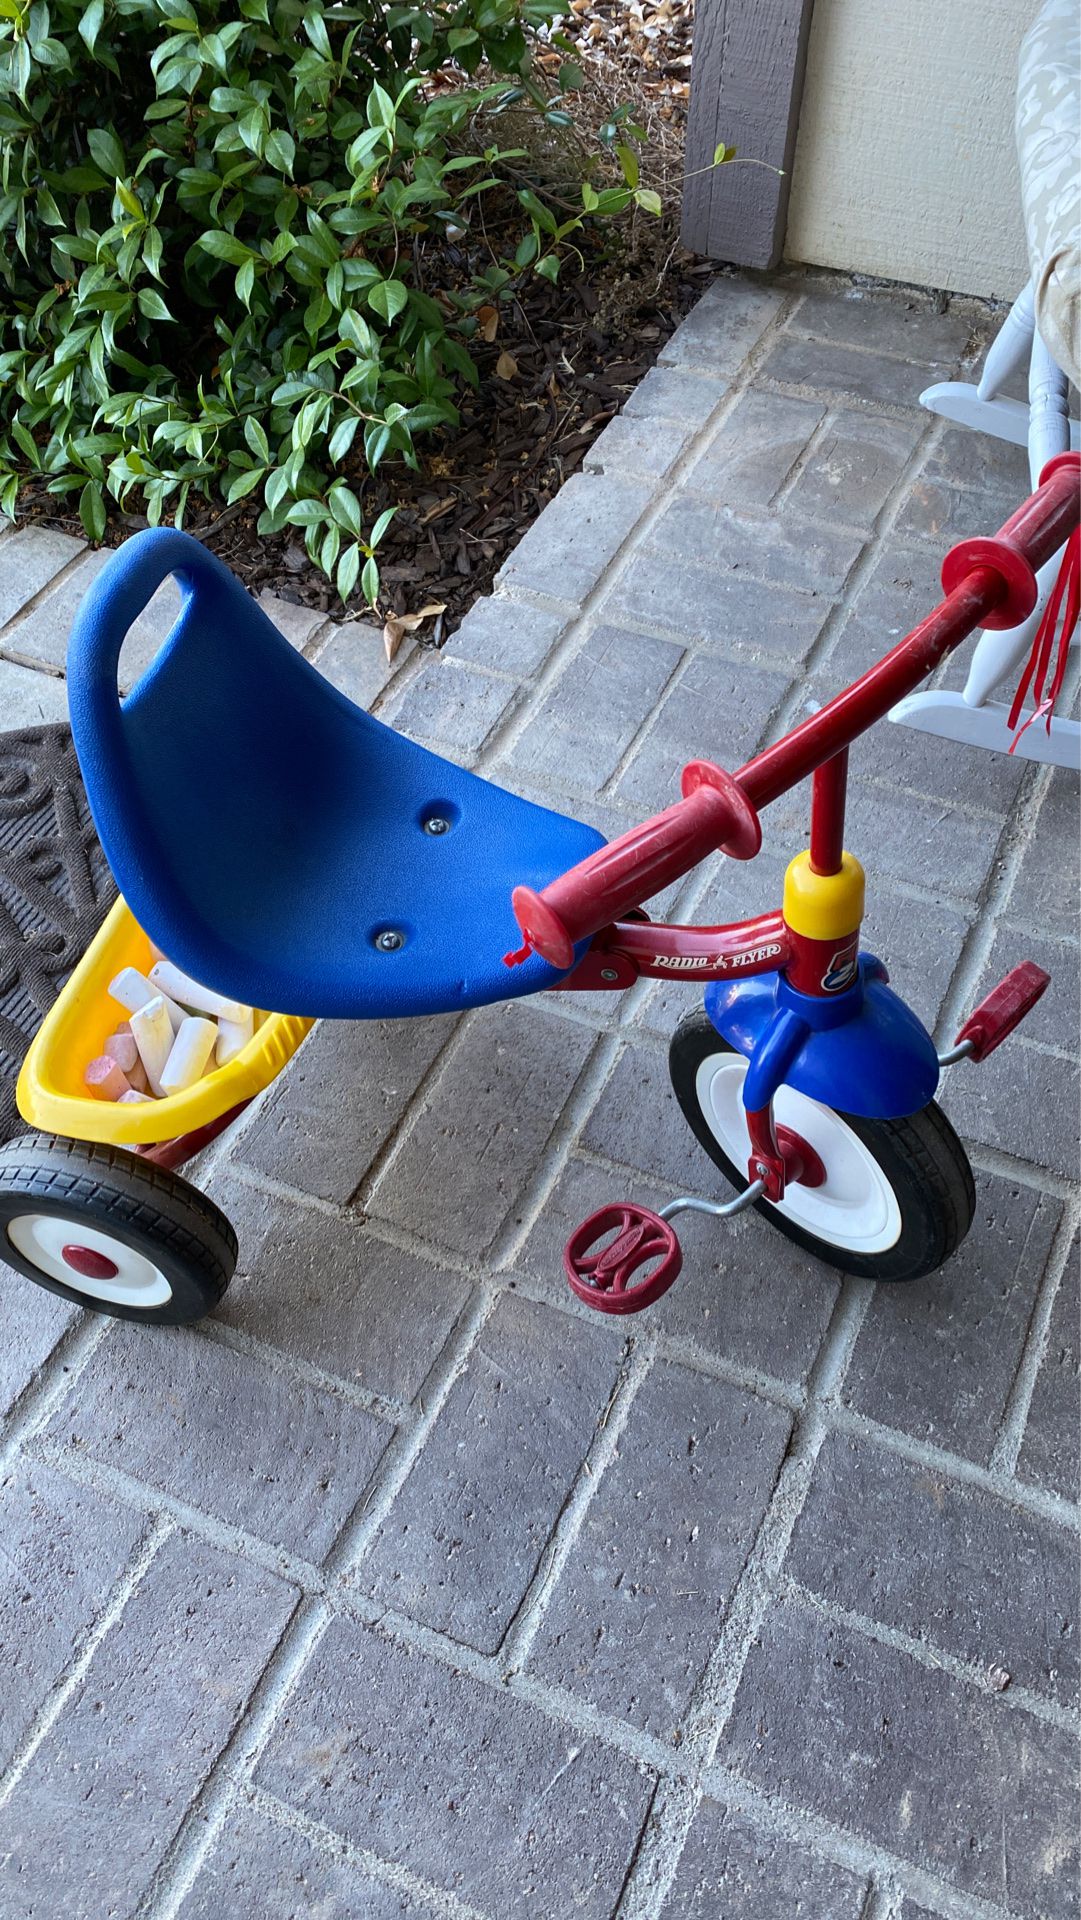 Radio Flyer Fold 2 Go bike toddlers so cute and fun tricycle